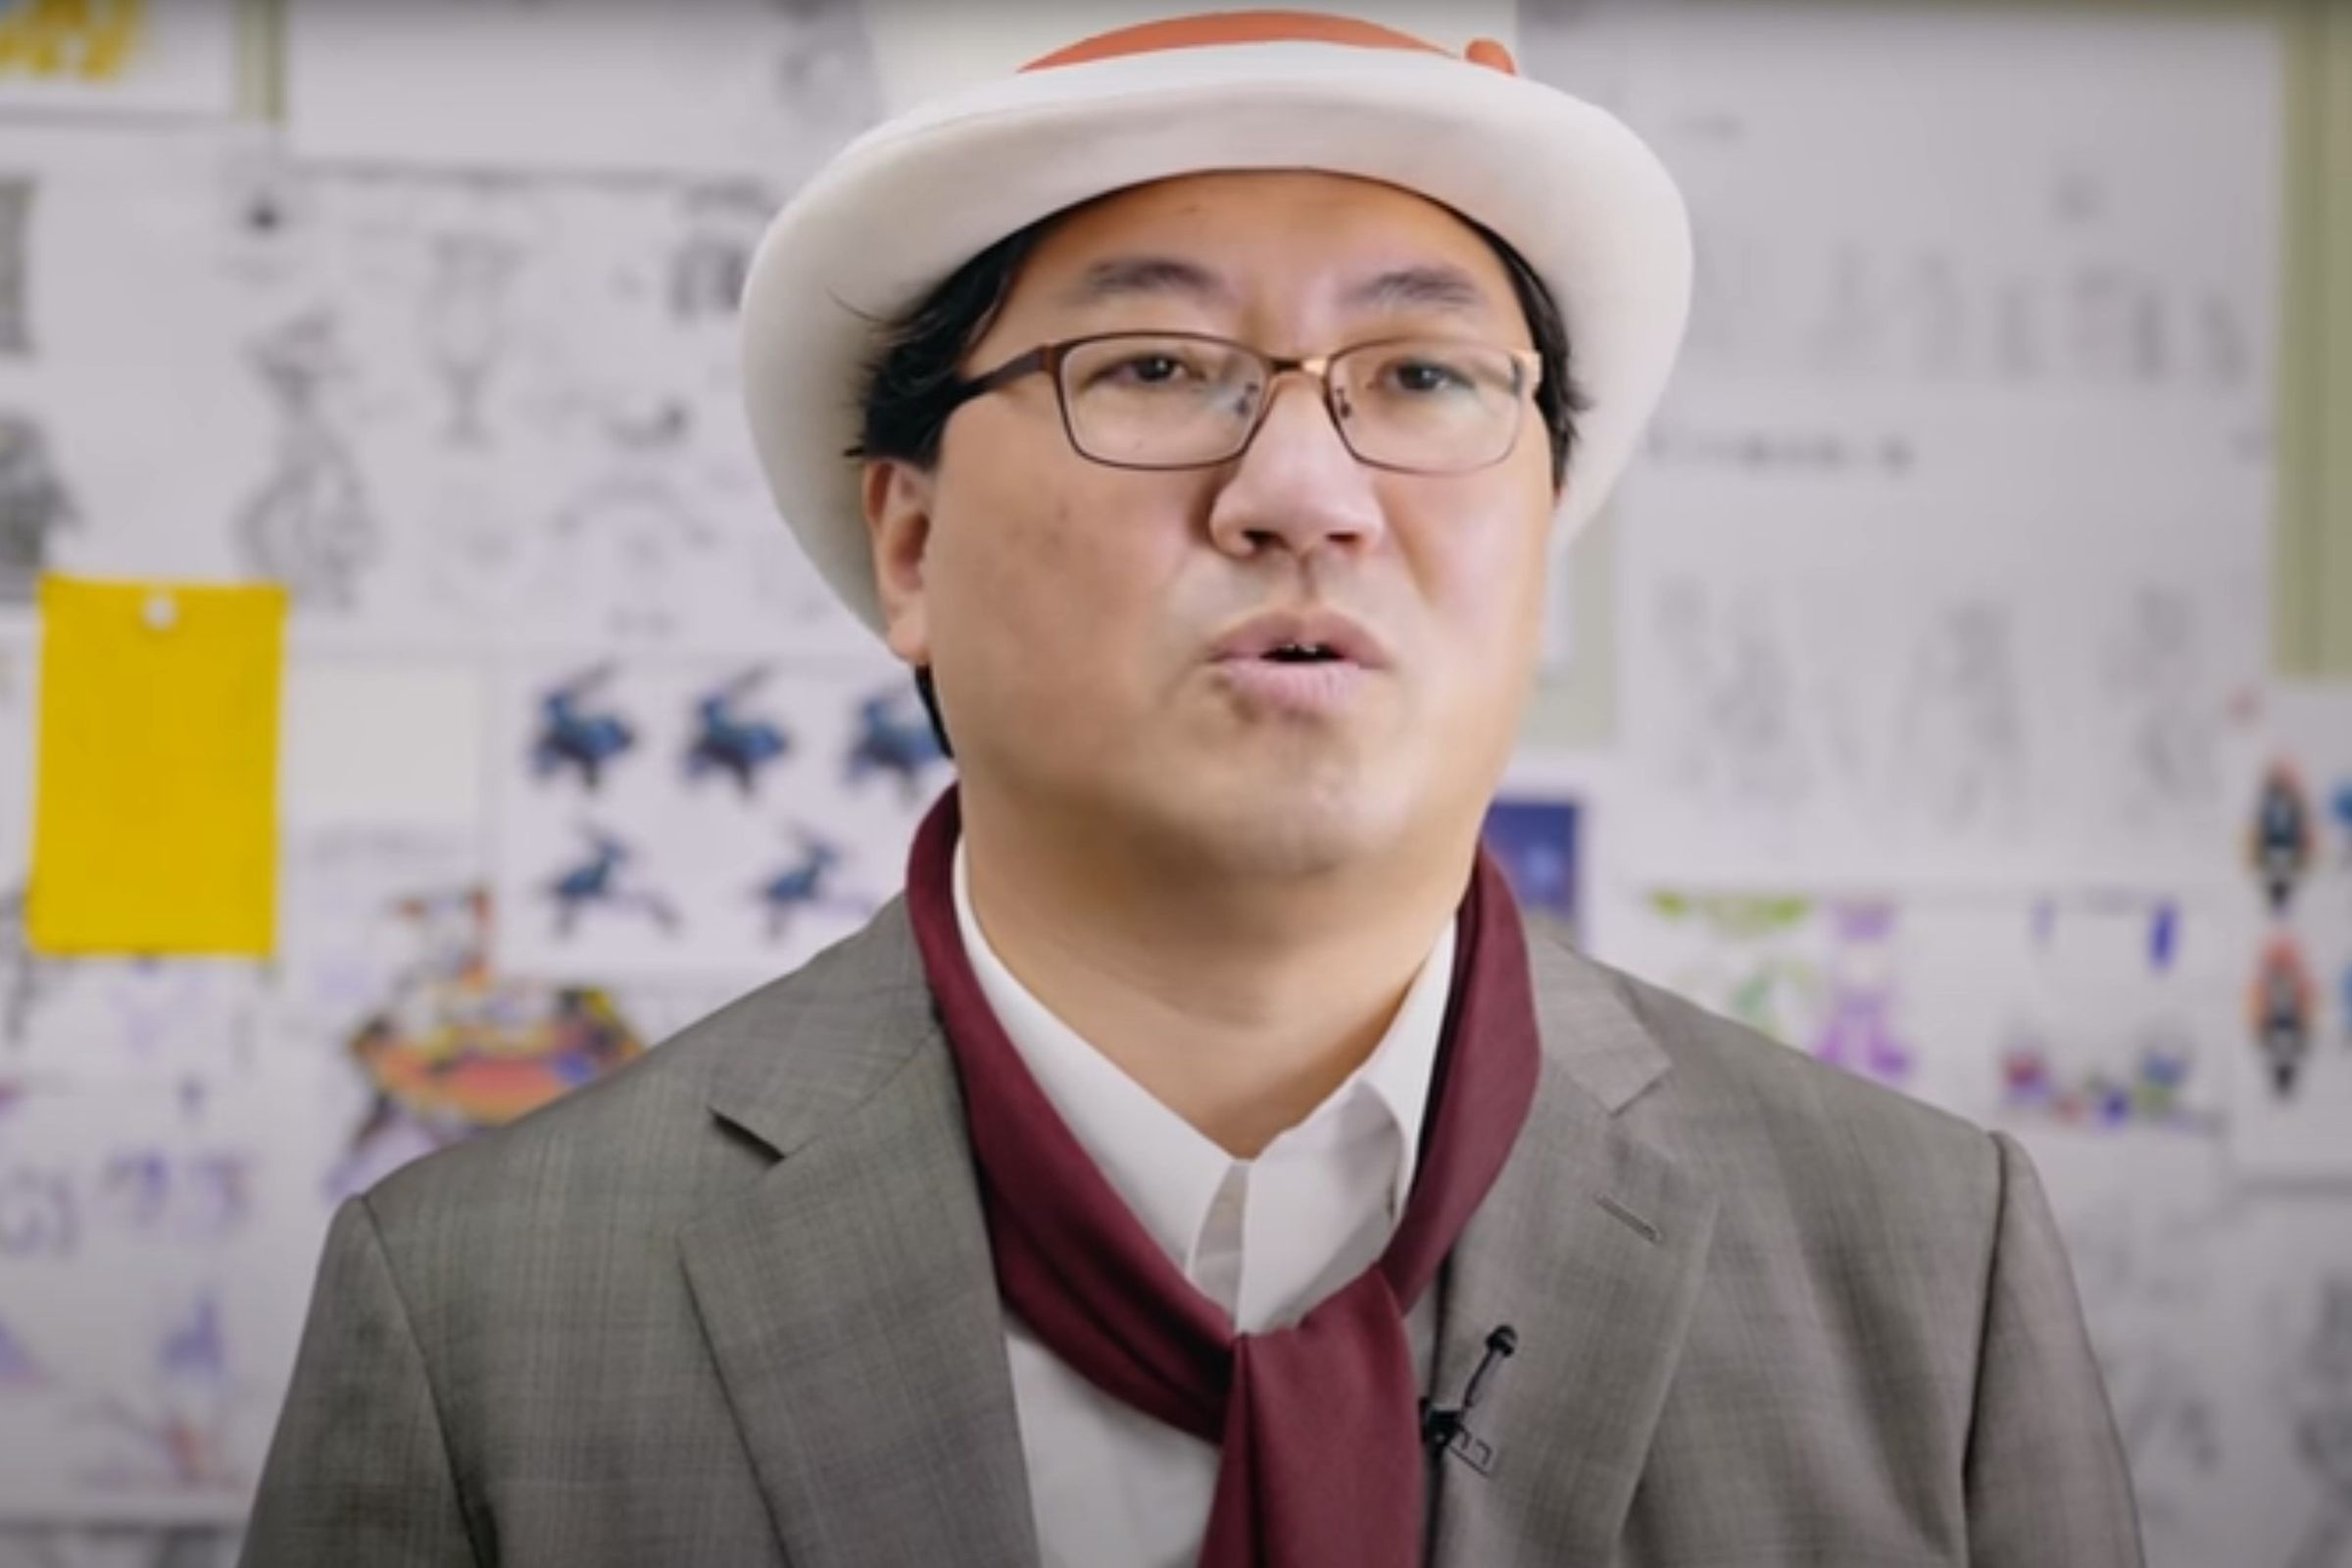 Yuji Naka in a white tophat and grey suit